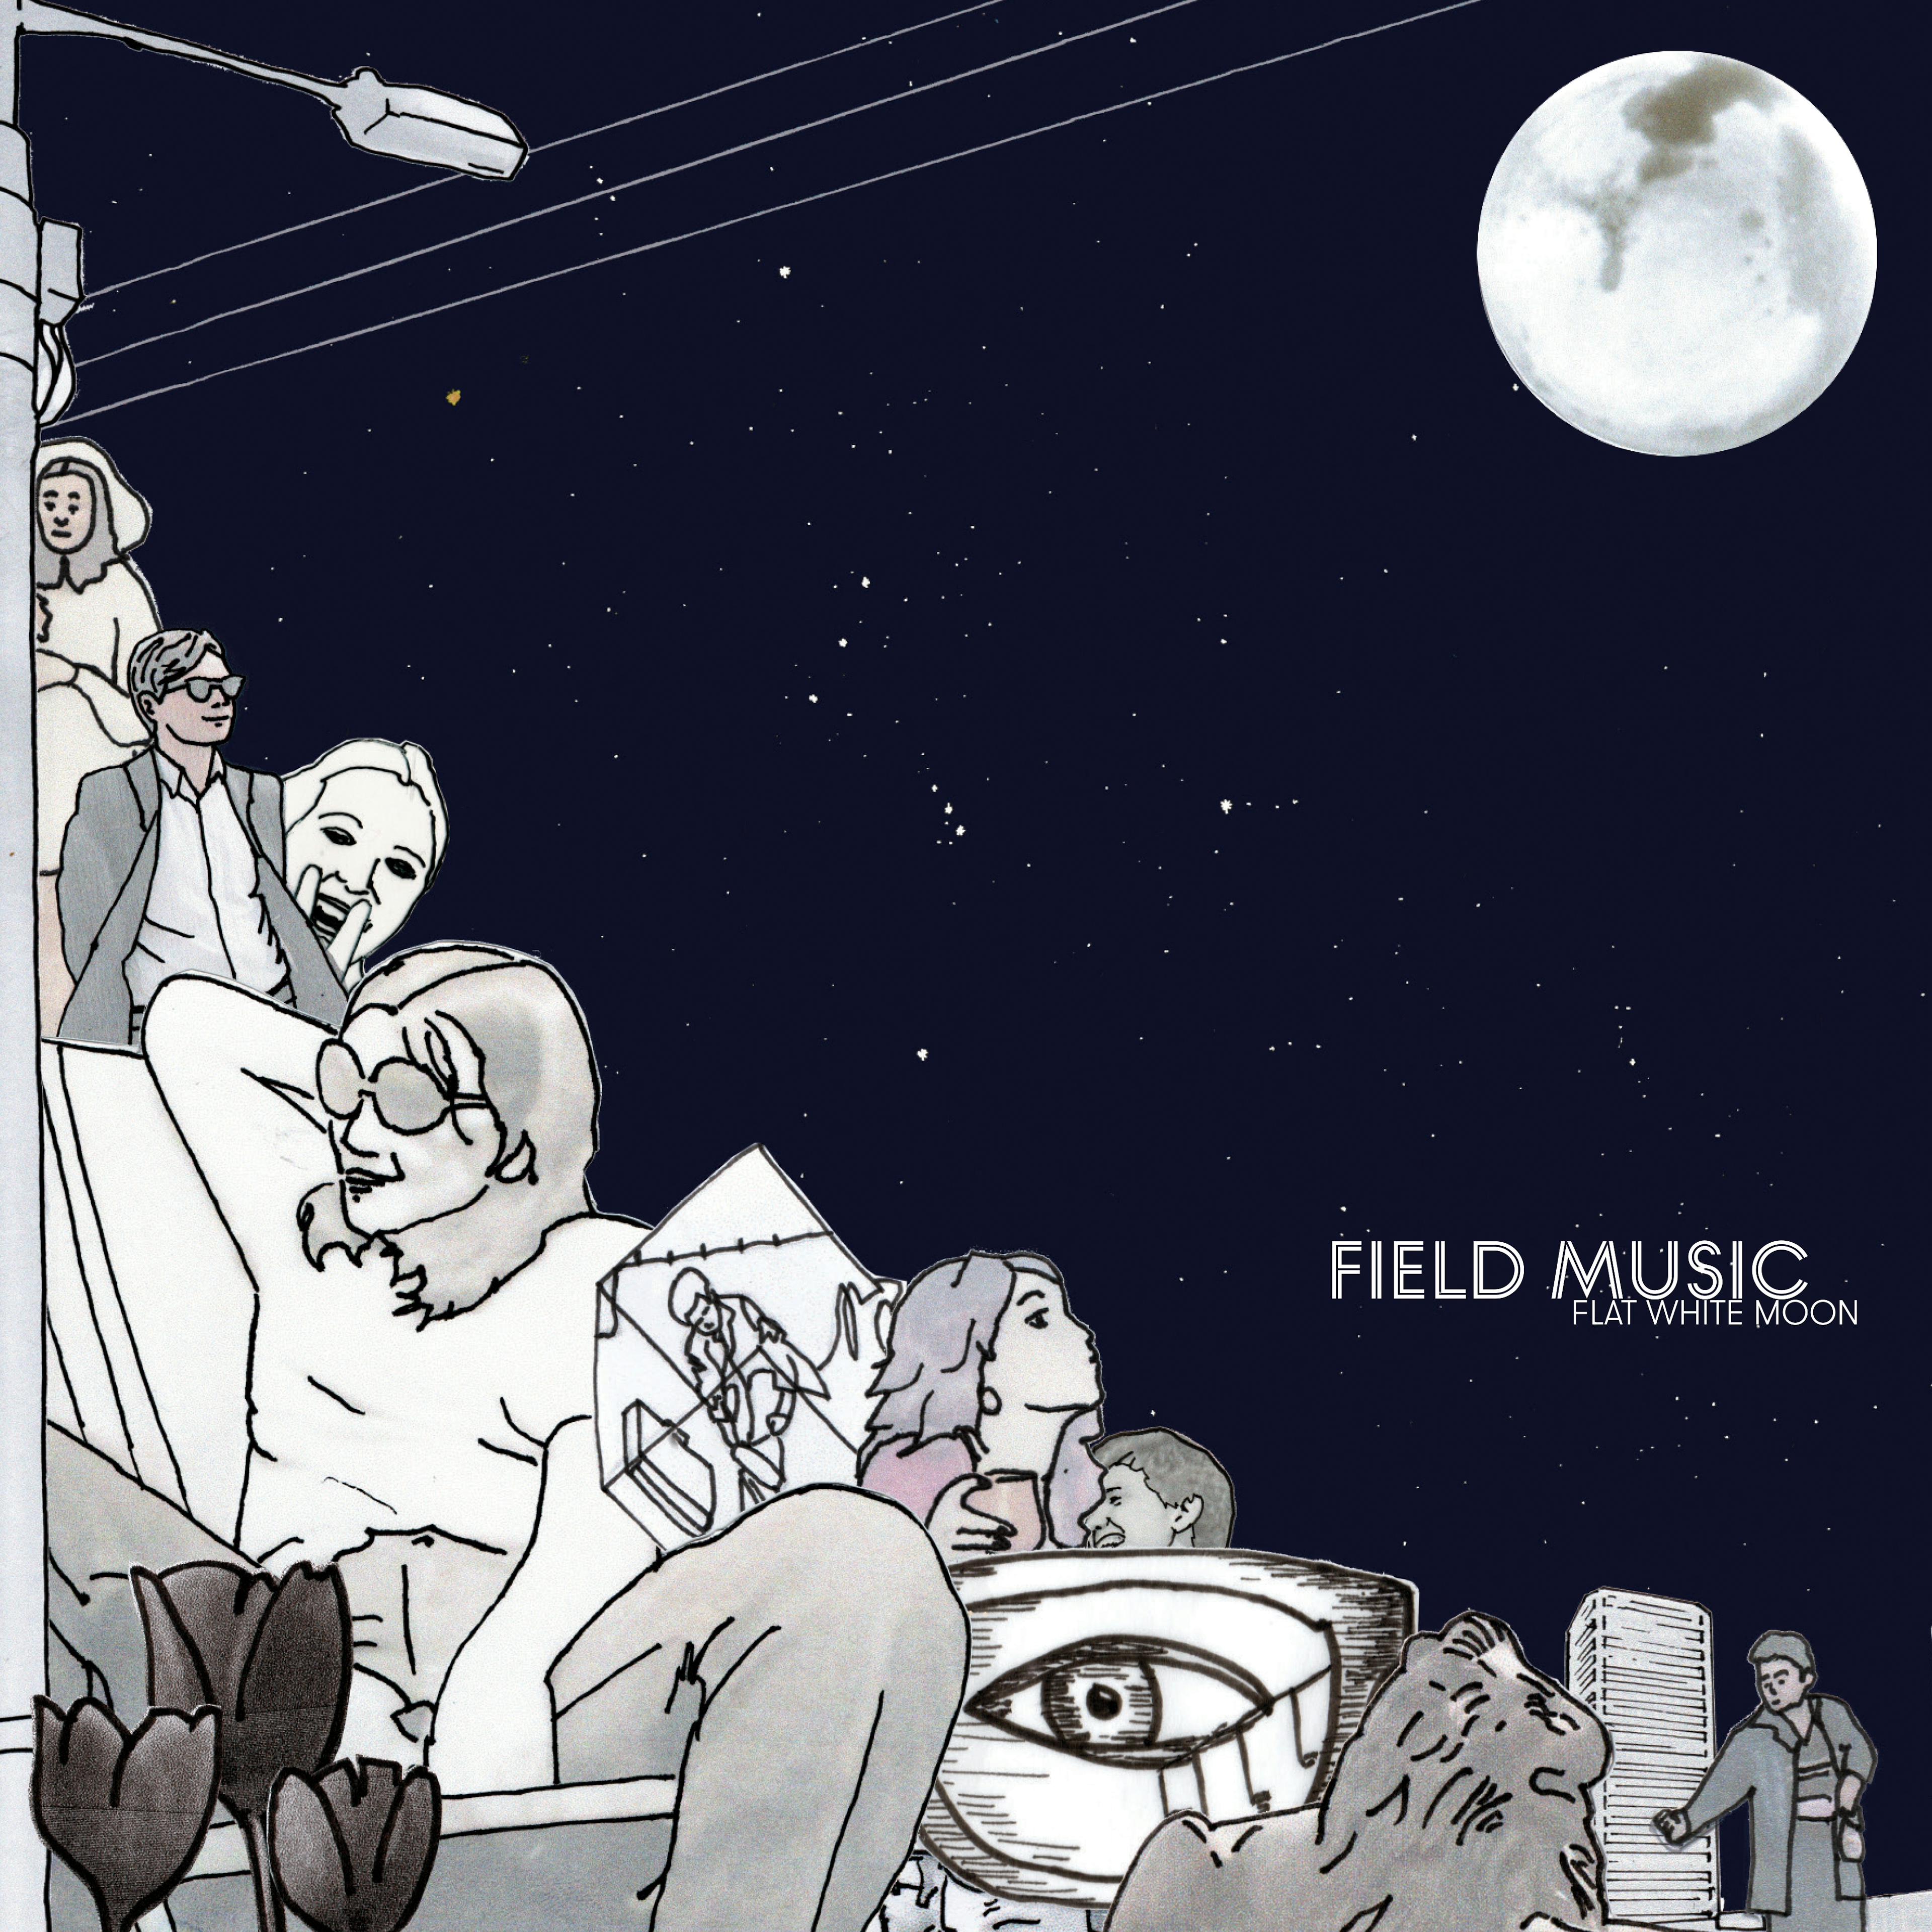 Album artwork for Flat White Moon by Field Music